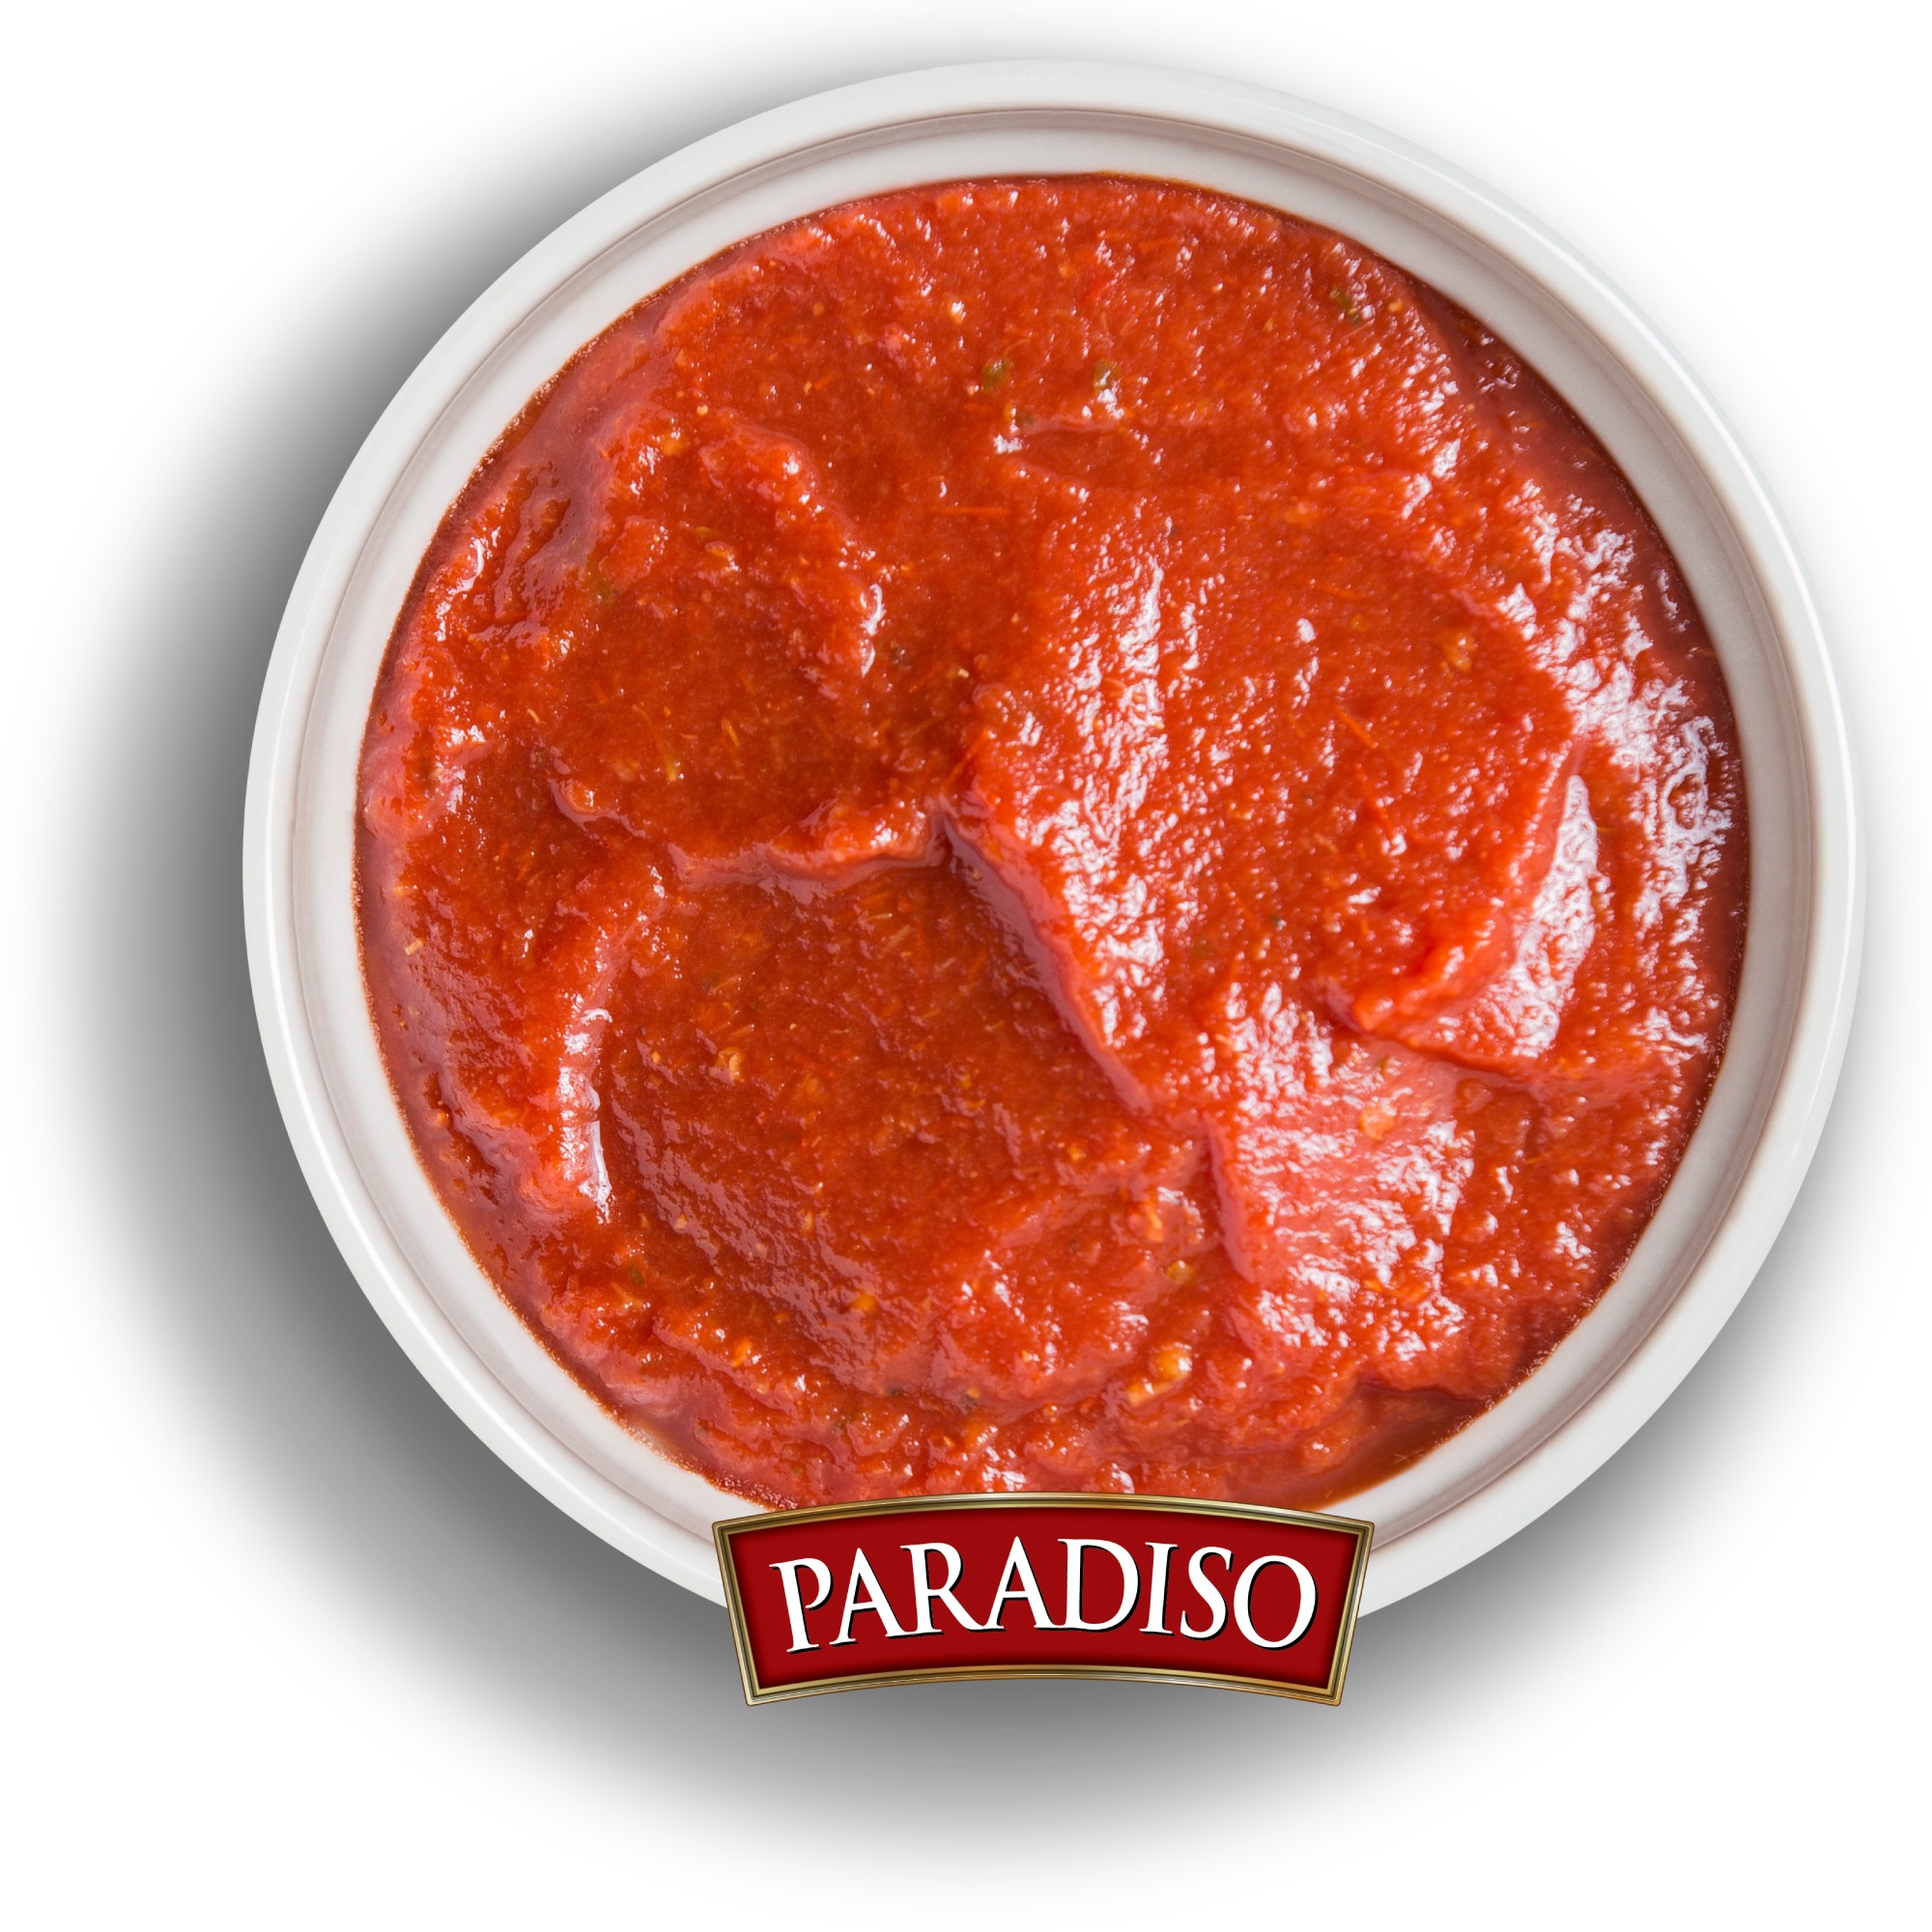 Paradiso Tomato Ingredient Products 493